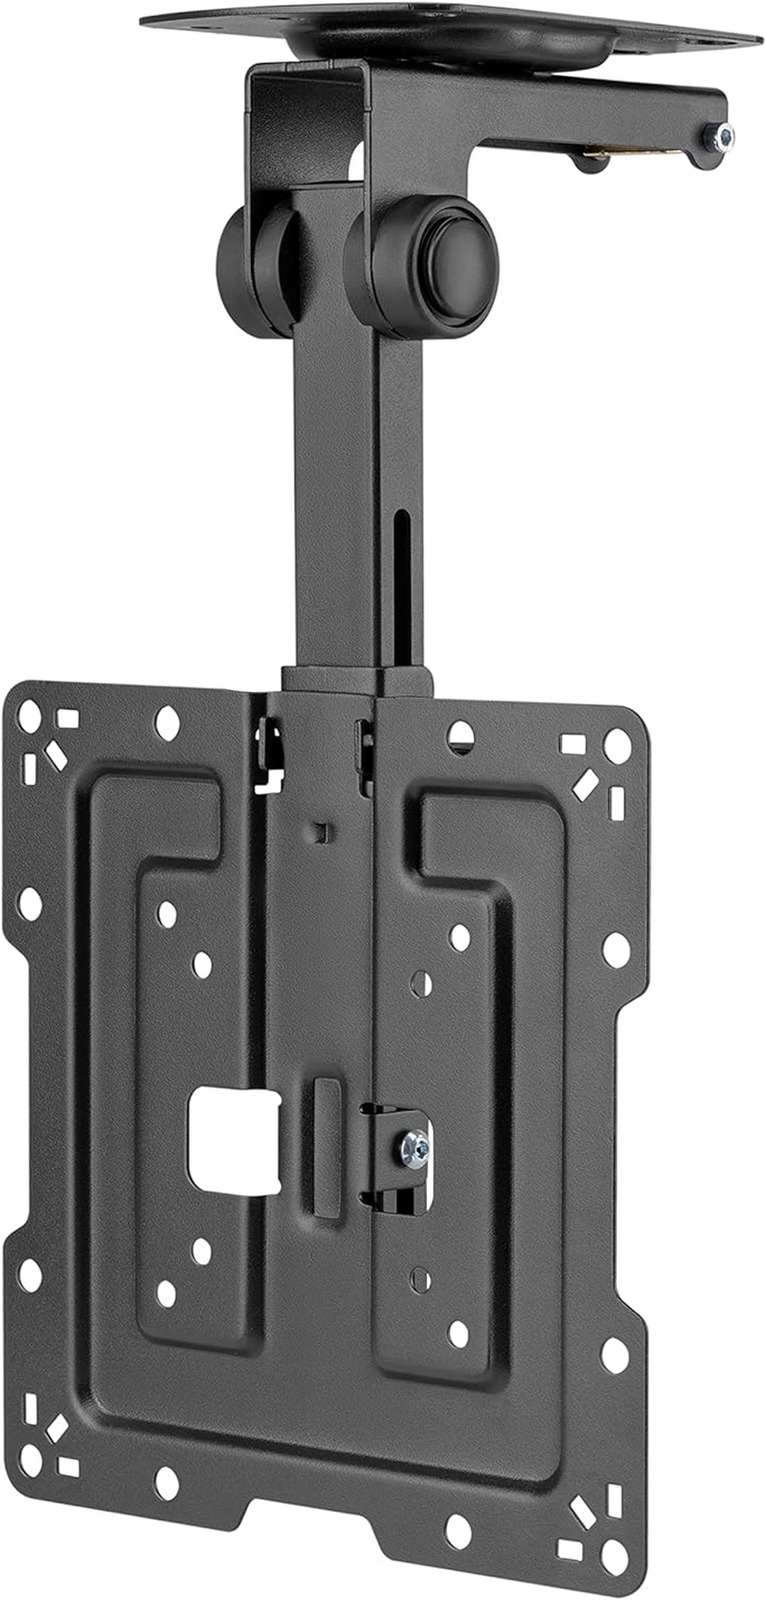 Flip down TV and Monitor Roof Ceiling Mount | Fits Flat Screen 19 to 43 Inch New